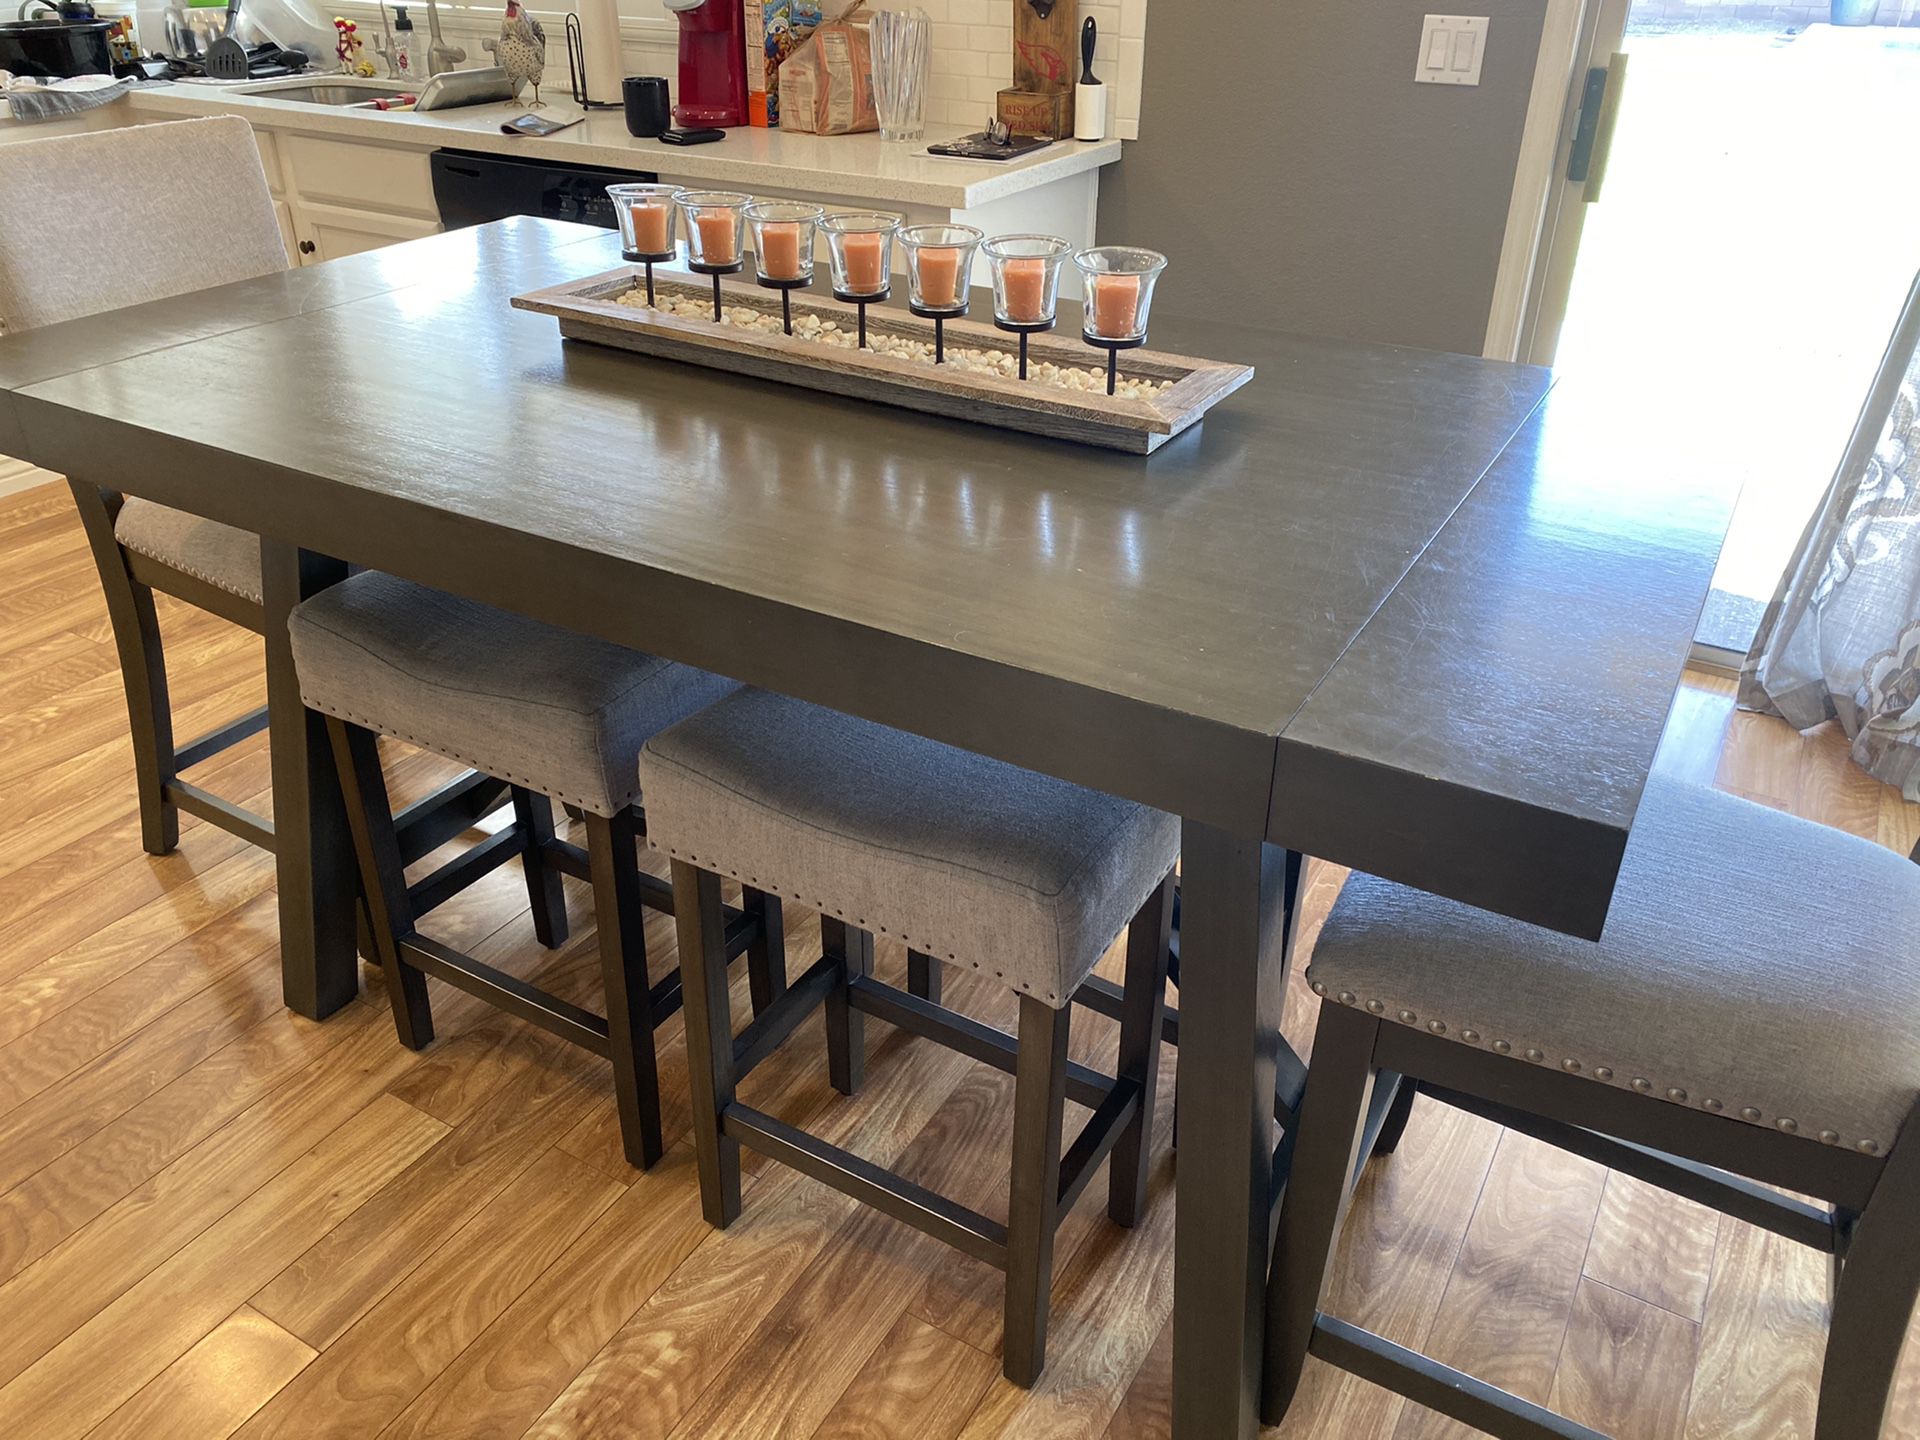 Kitchen table w/chairs and stools